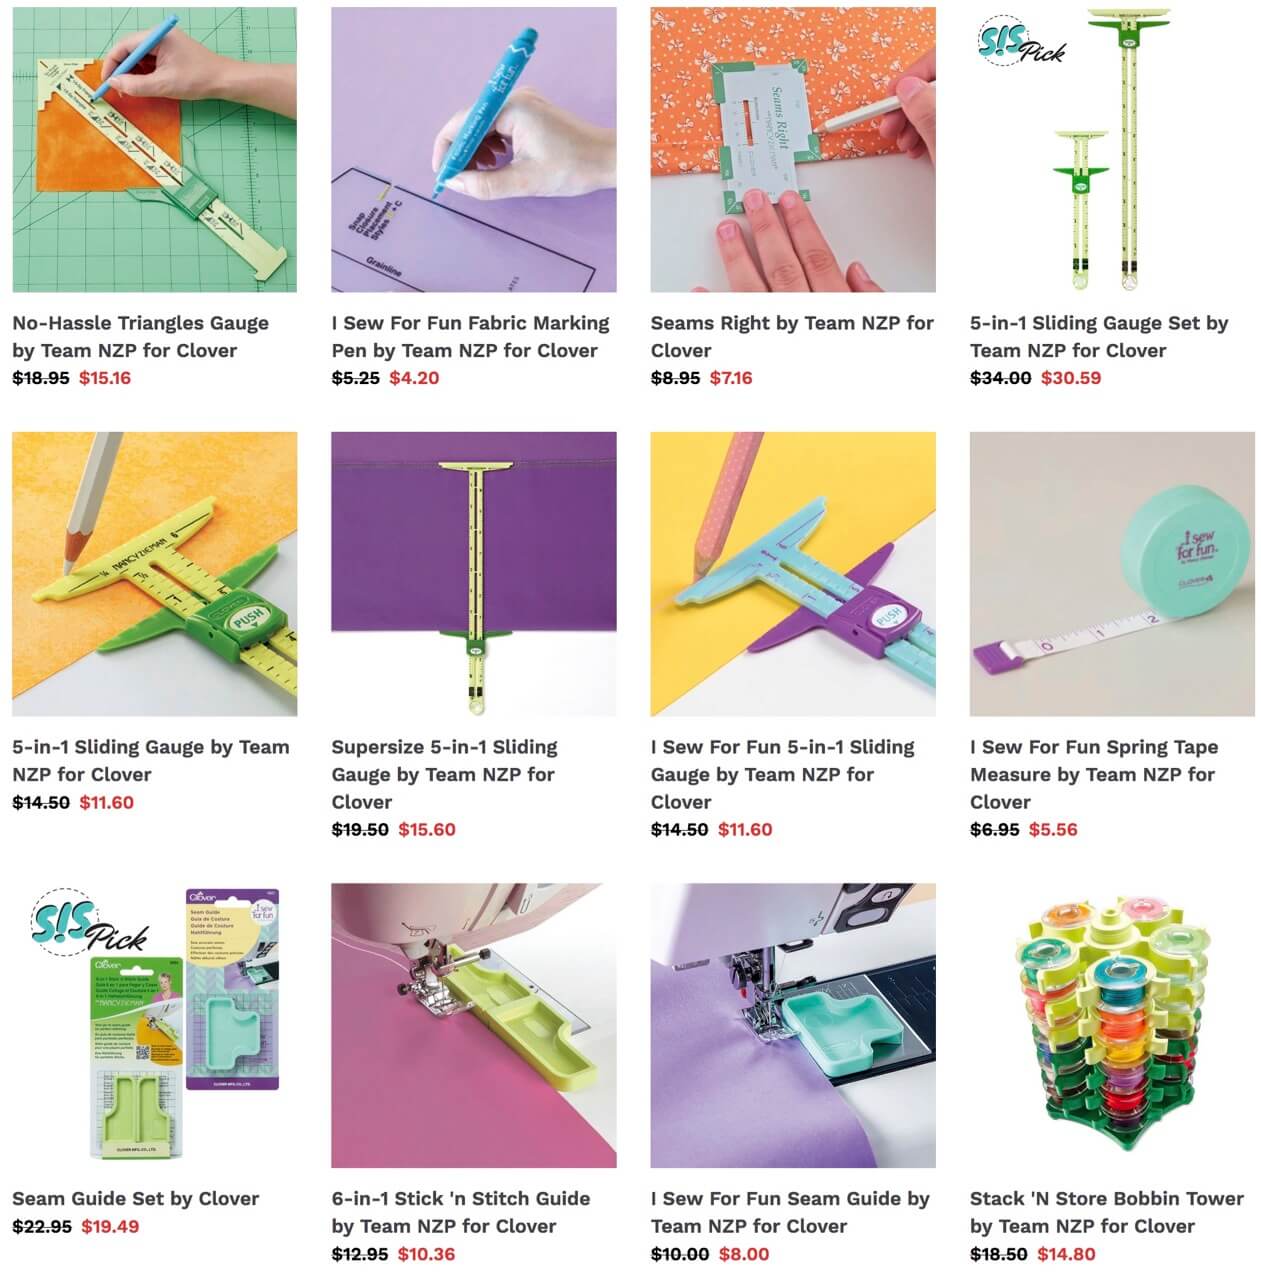 Save 20% off all Clover Products through May 31 at Nancy Zieman Productions at ShopNZP.com